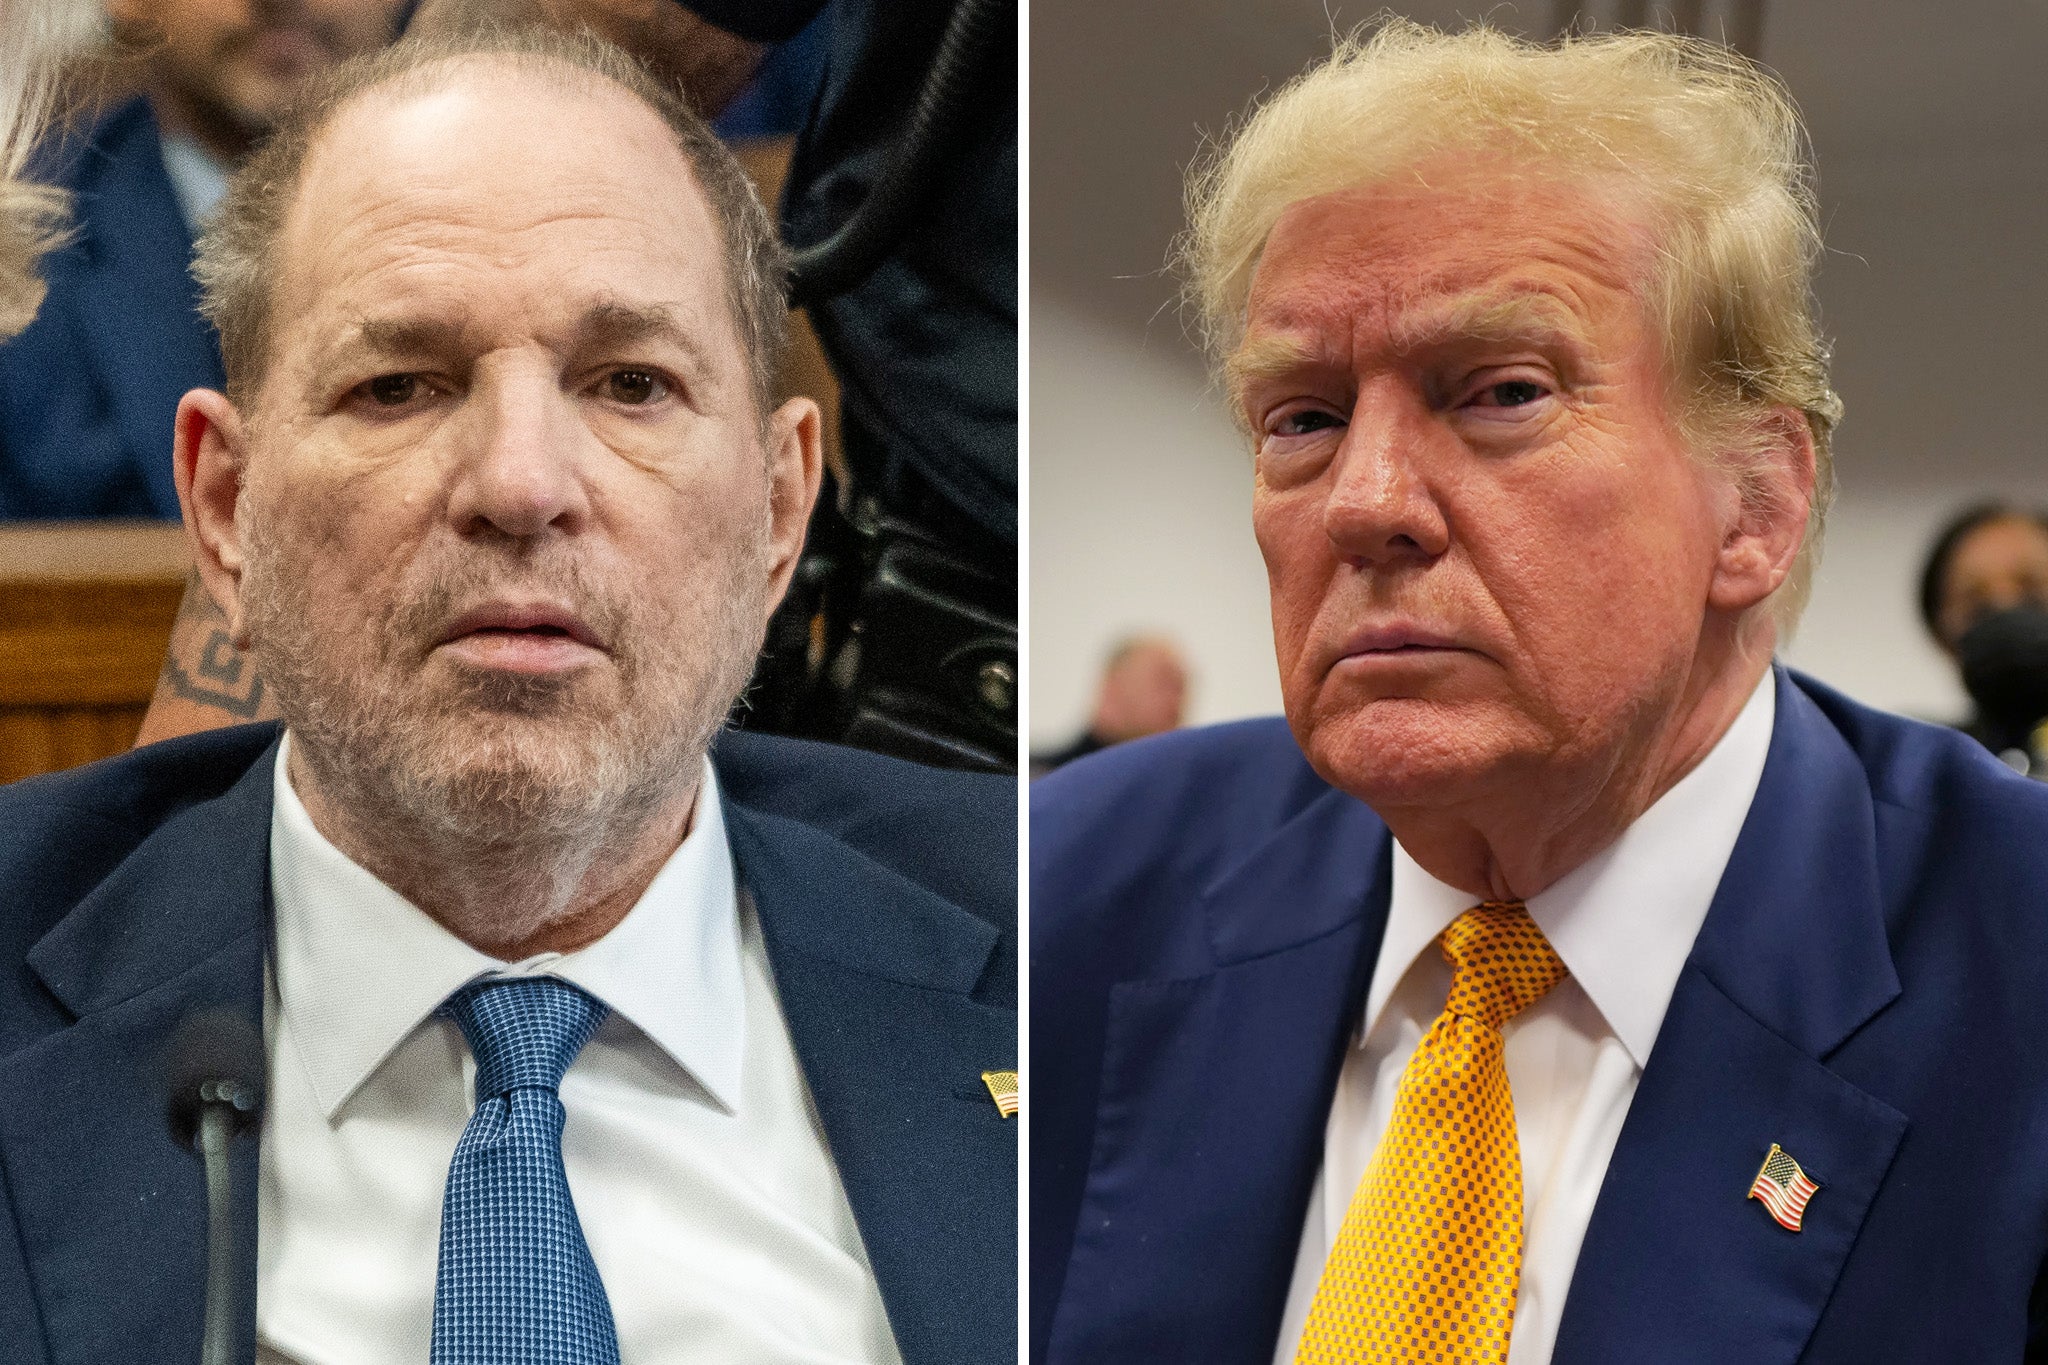 Harvey Weinstein in court on the left, Donald Trump on the right